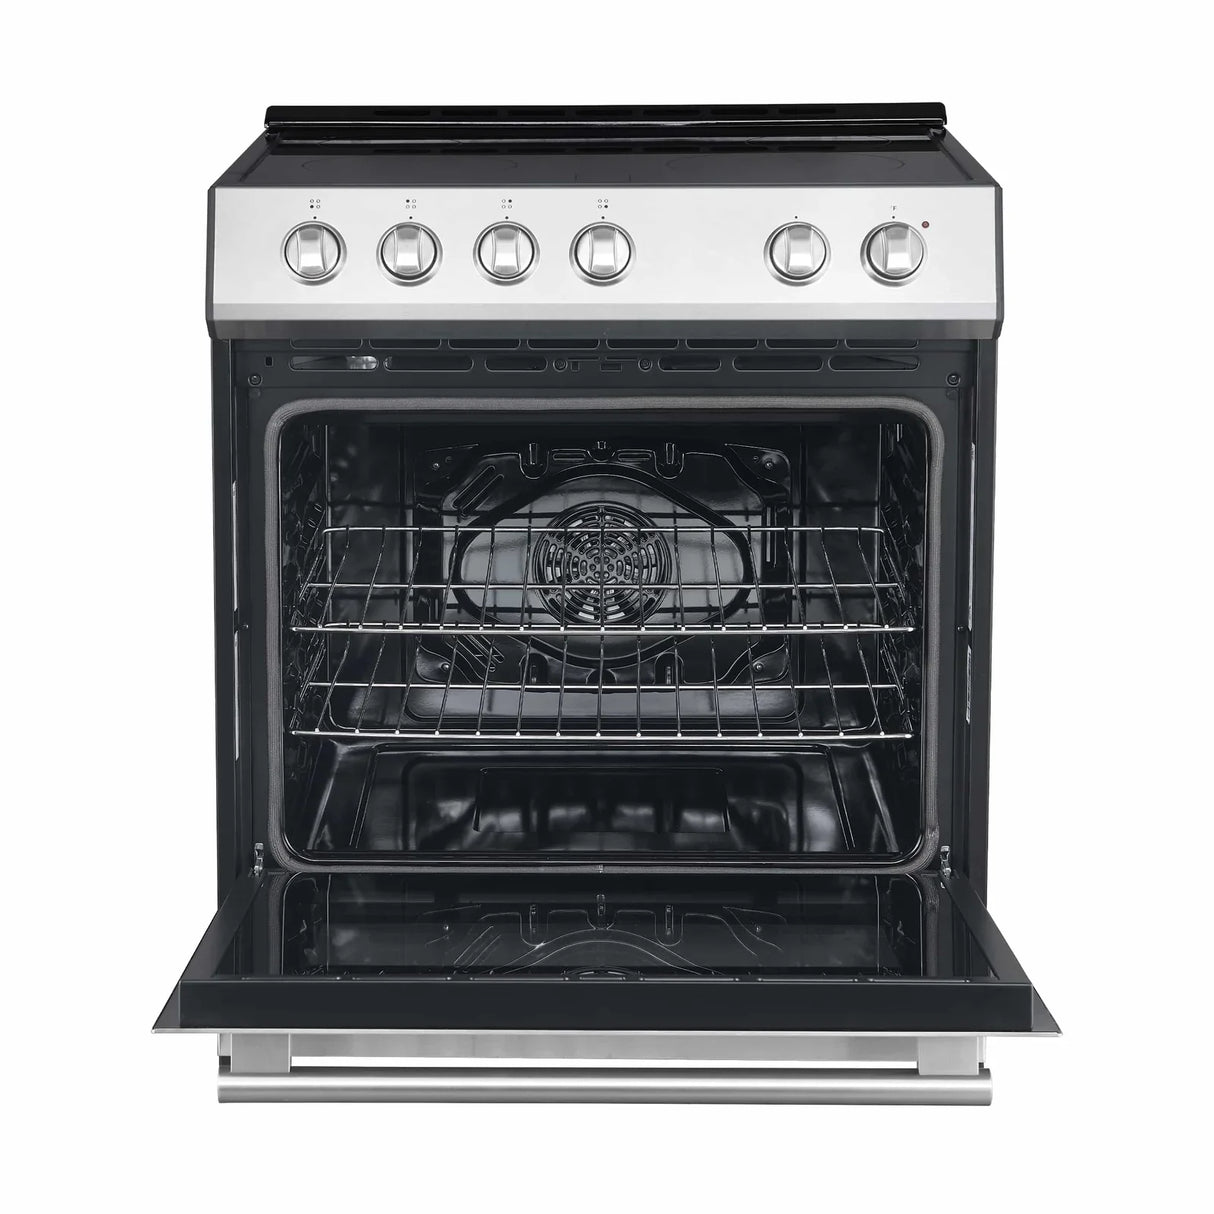 Forno Espresso 2-Piece Appliance Package - 30-Inch Electric Range with 5.0 Cu.Ft. Electric Oven and Under Cabinet Range Hood in Stainless Steel with Brass Handle